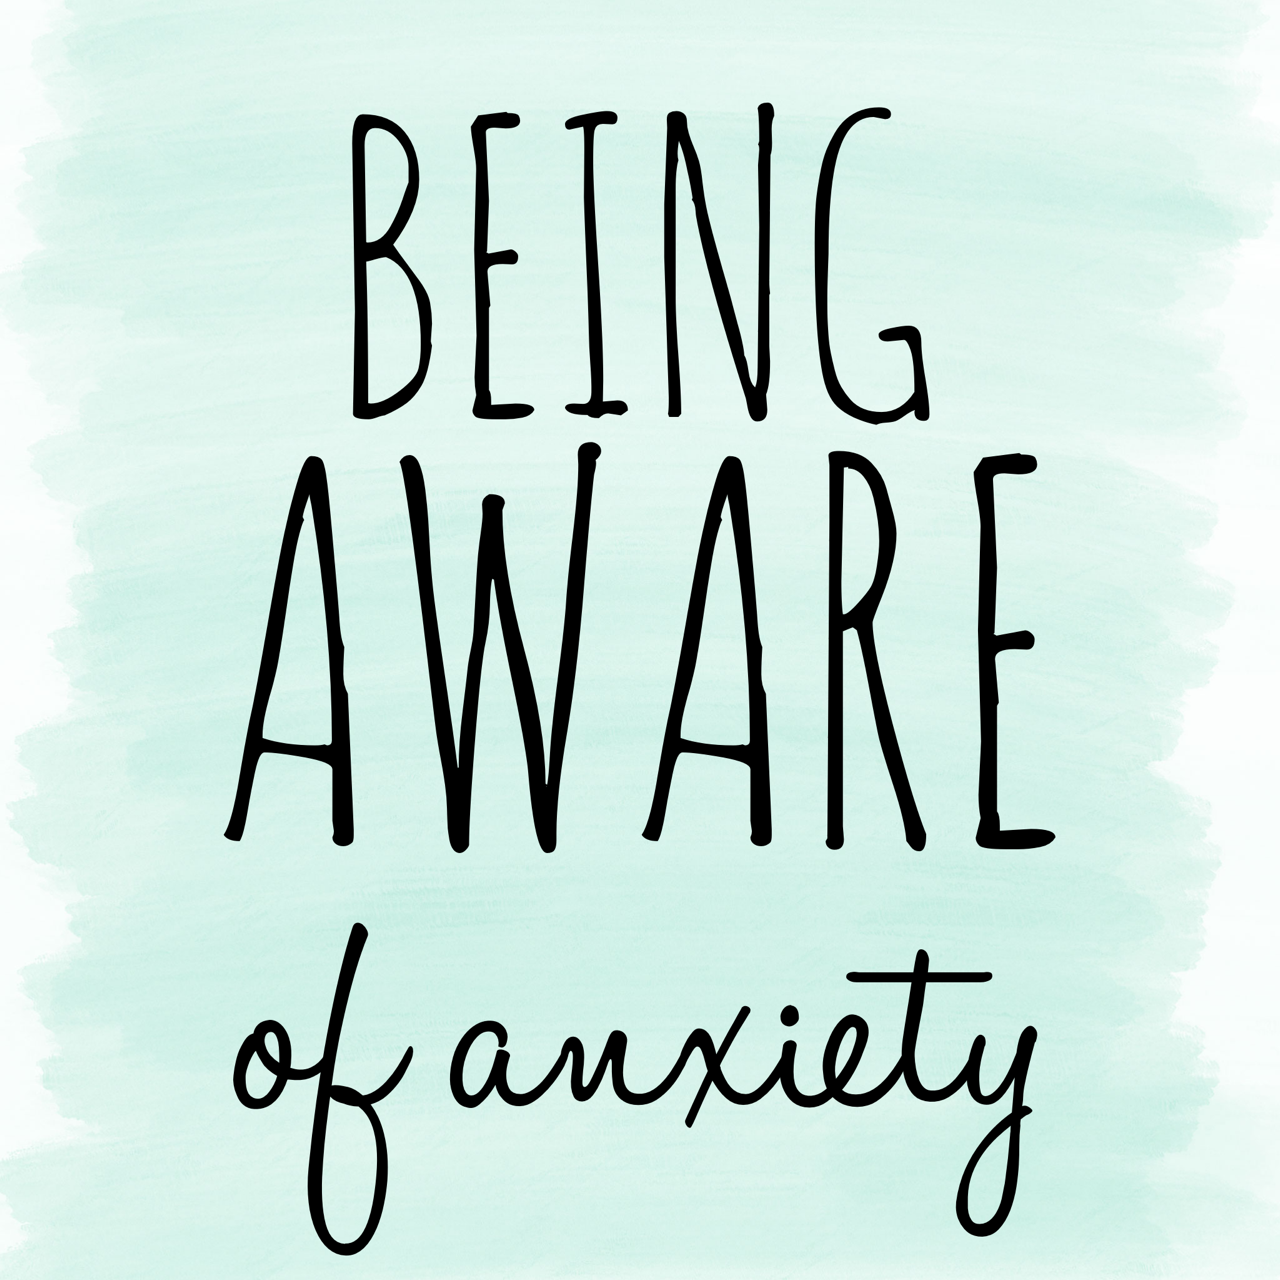 Being Aware of Anxiety hypnosis download - Dan Regan Hypnotherapy in Ely